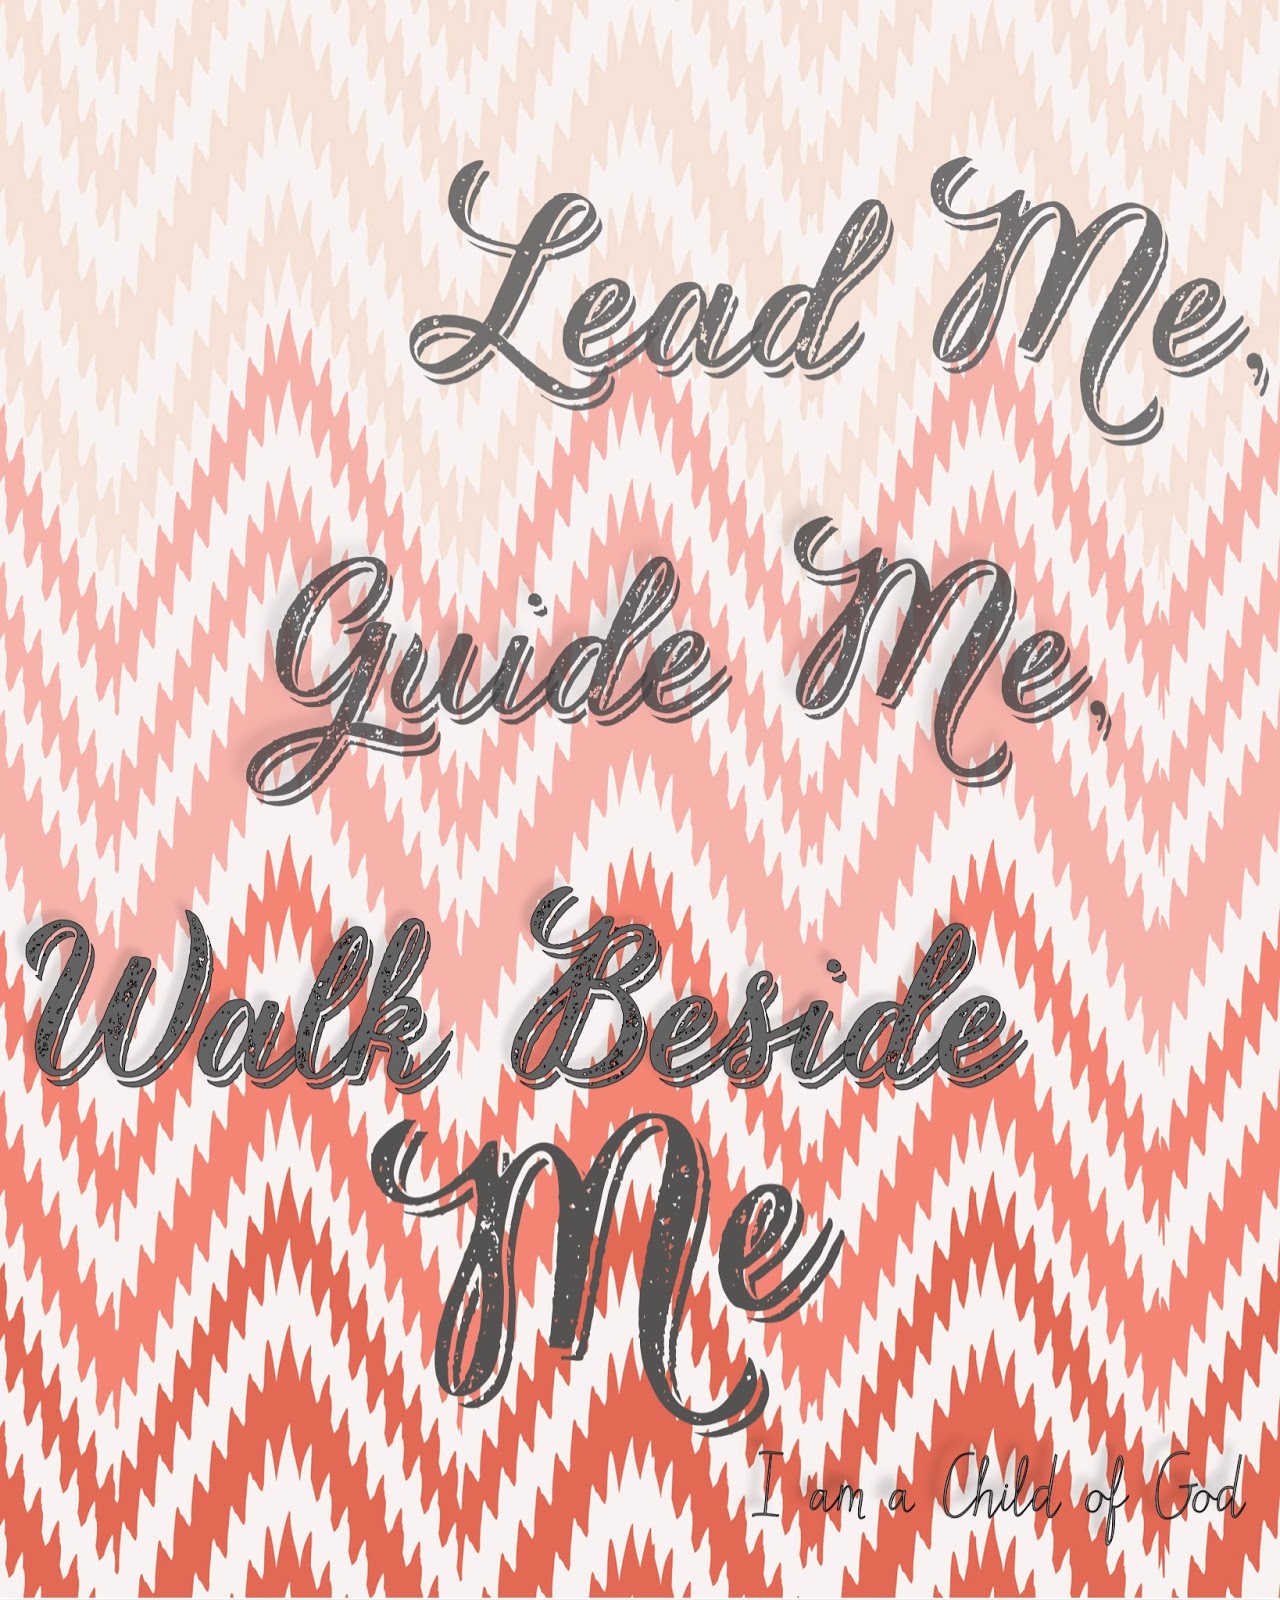 Lead Me, Guide Me, Walk Beside Me~I am a Child of God Free Printable for Girls